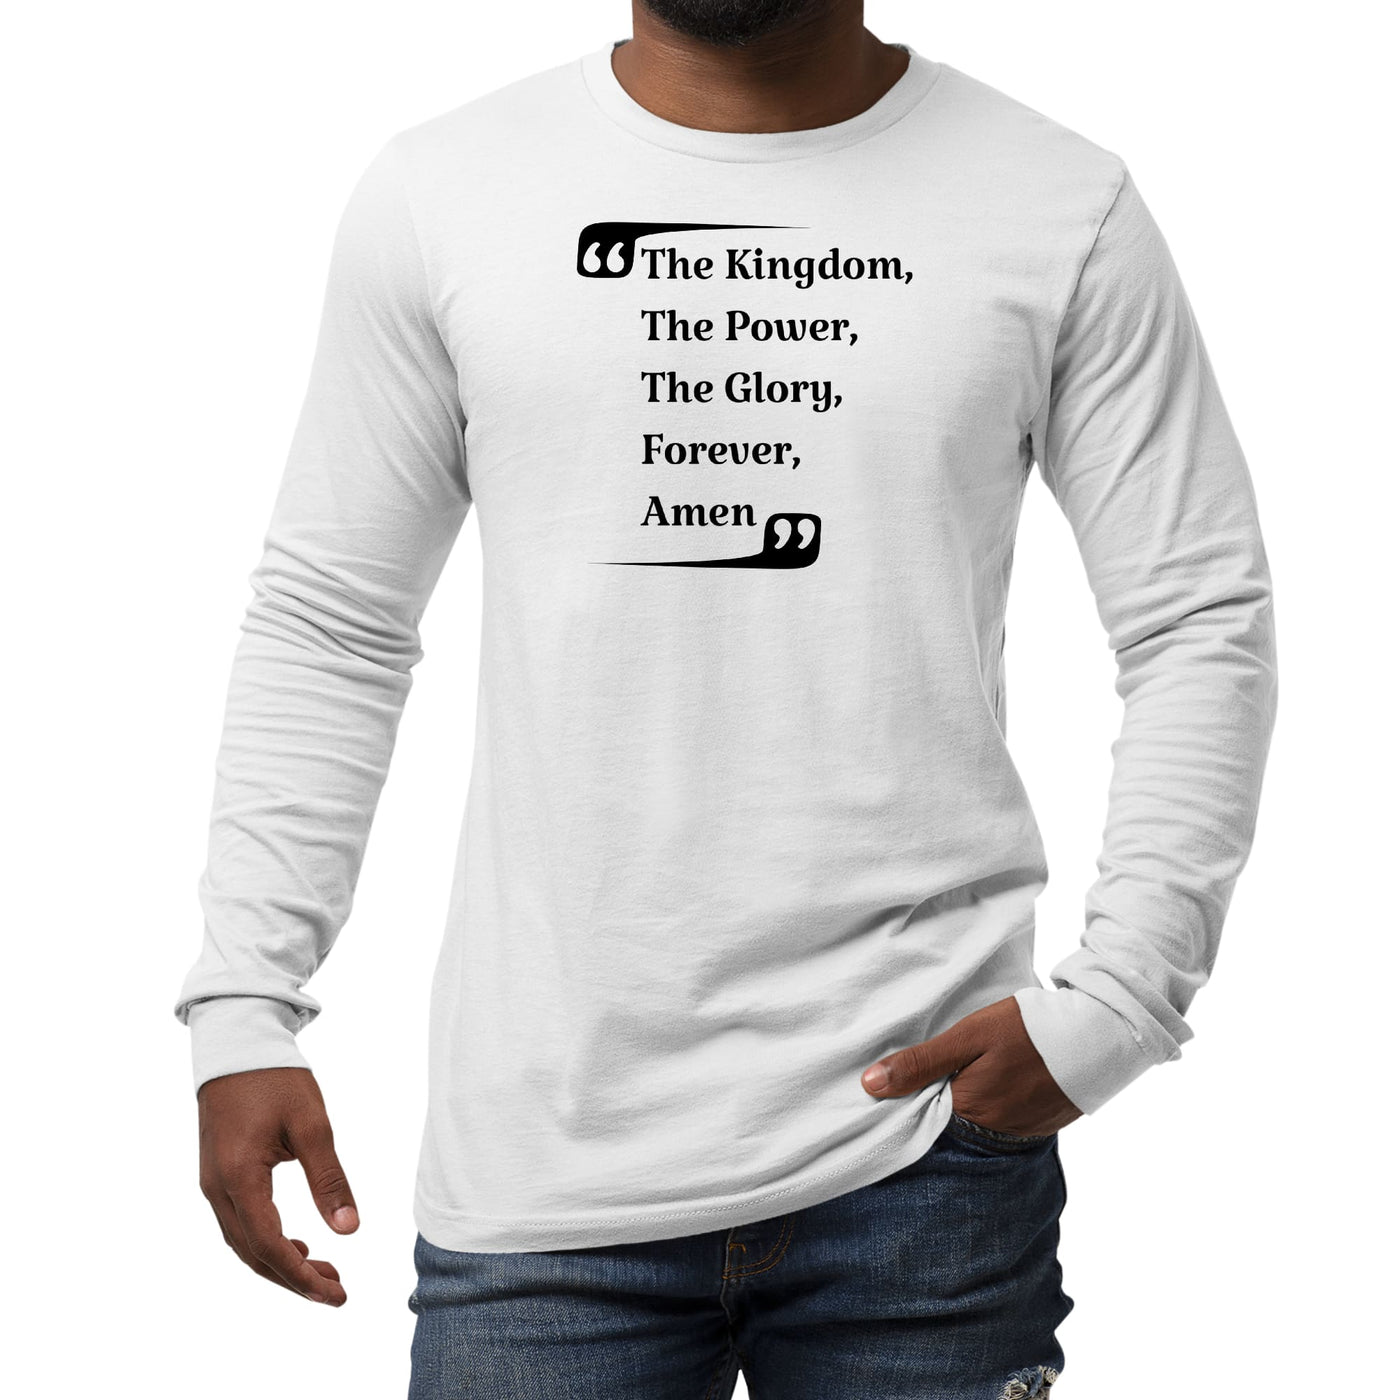 Mens Long Sleeve Graphic T-shirt - The Kingdom The Power The Glory - Unisex